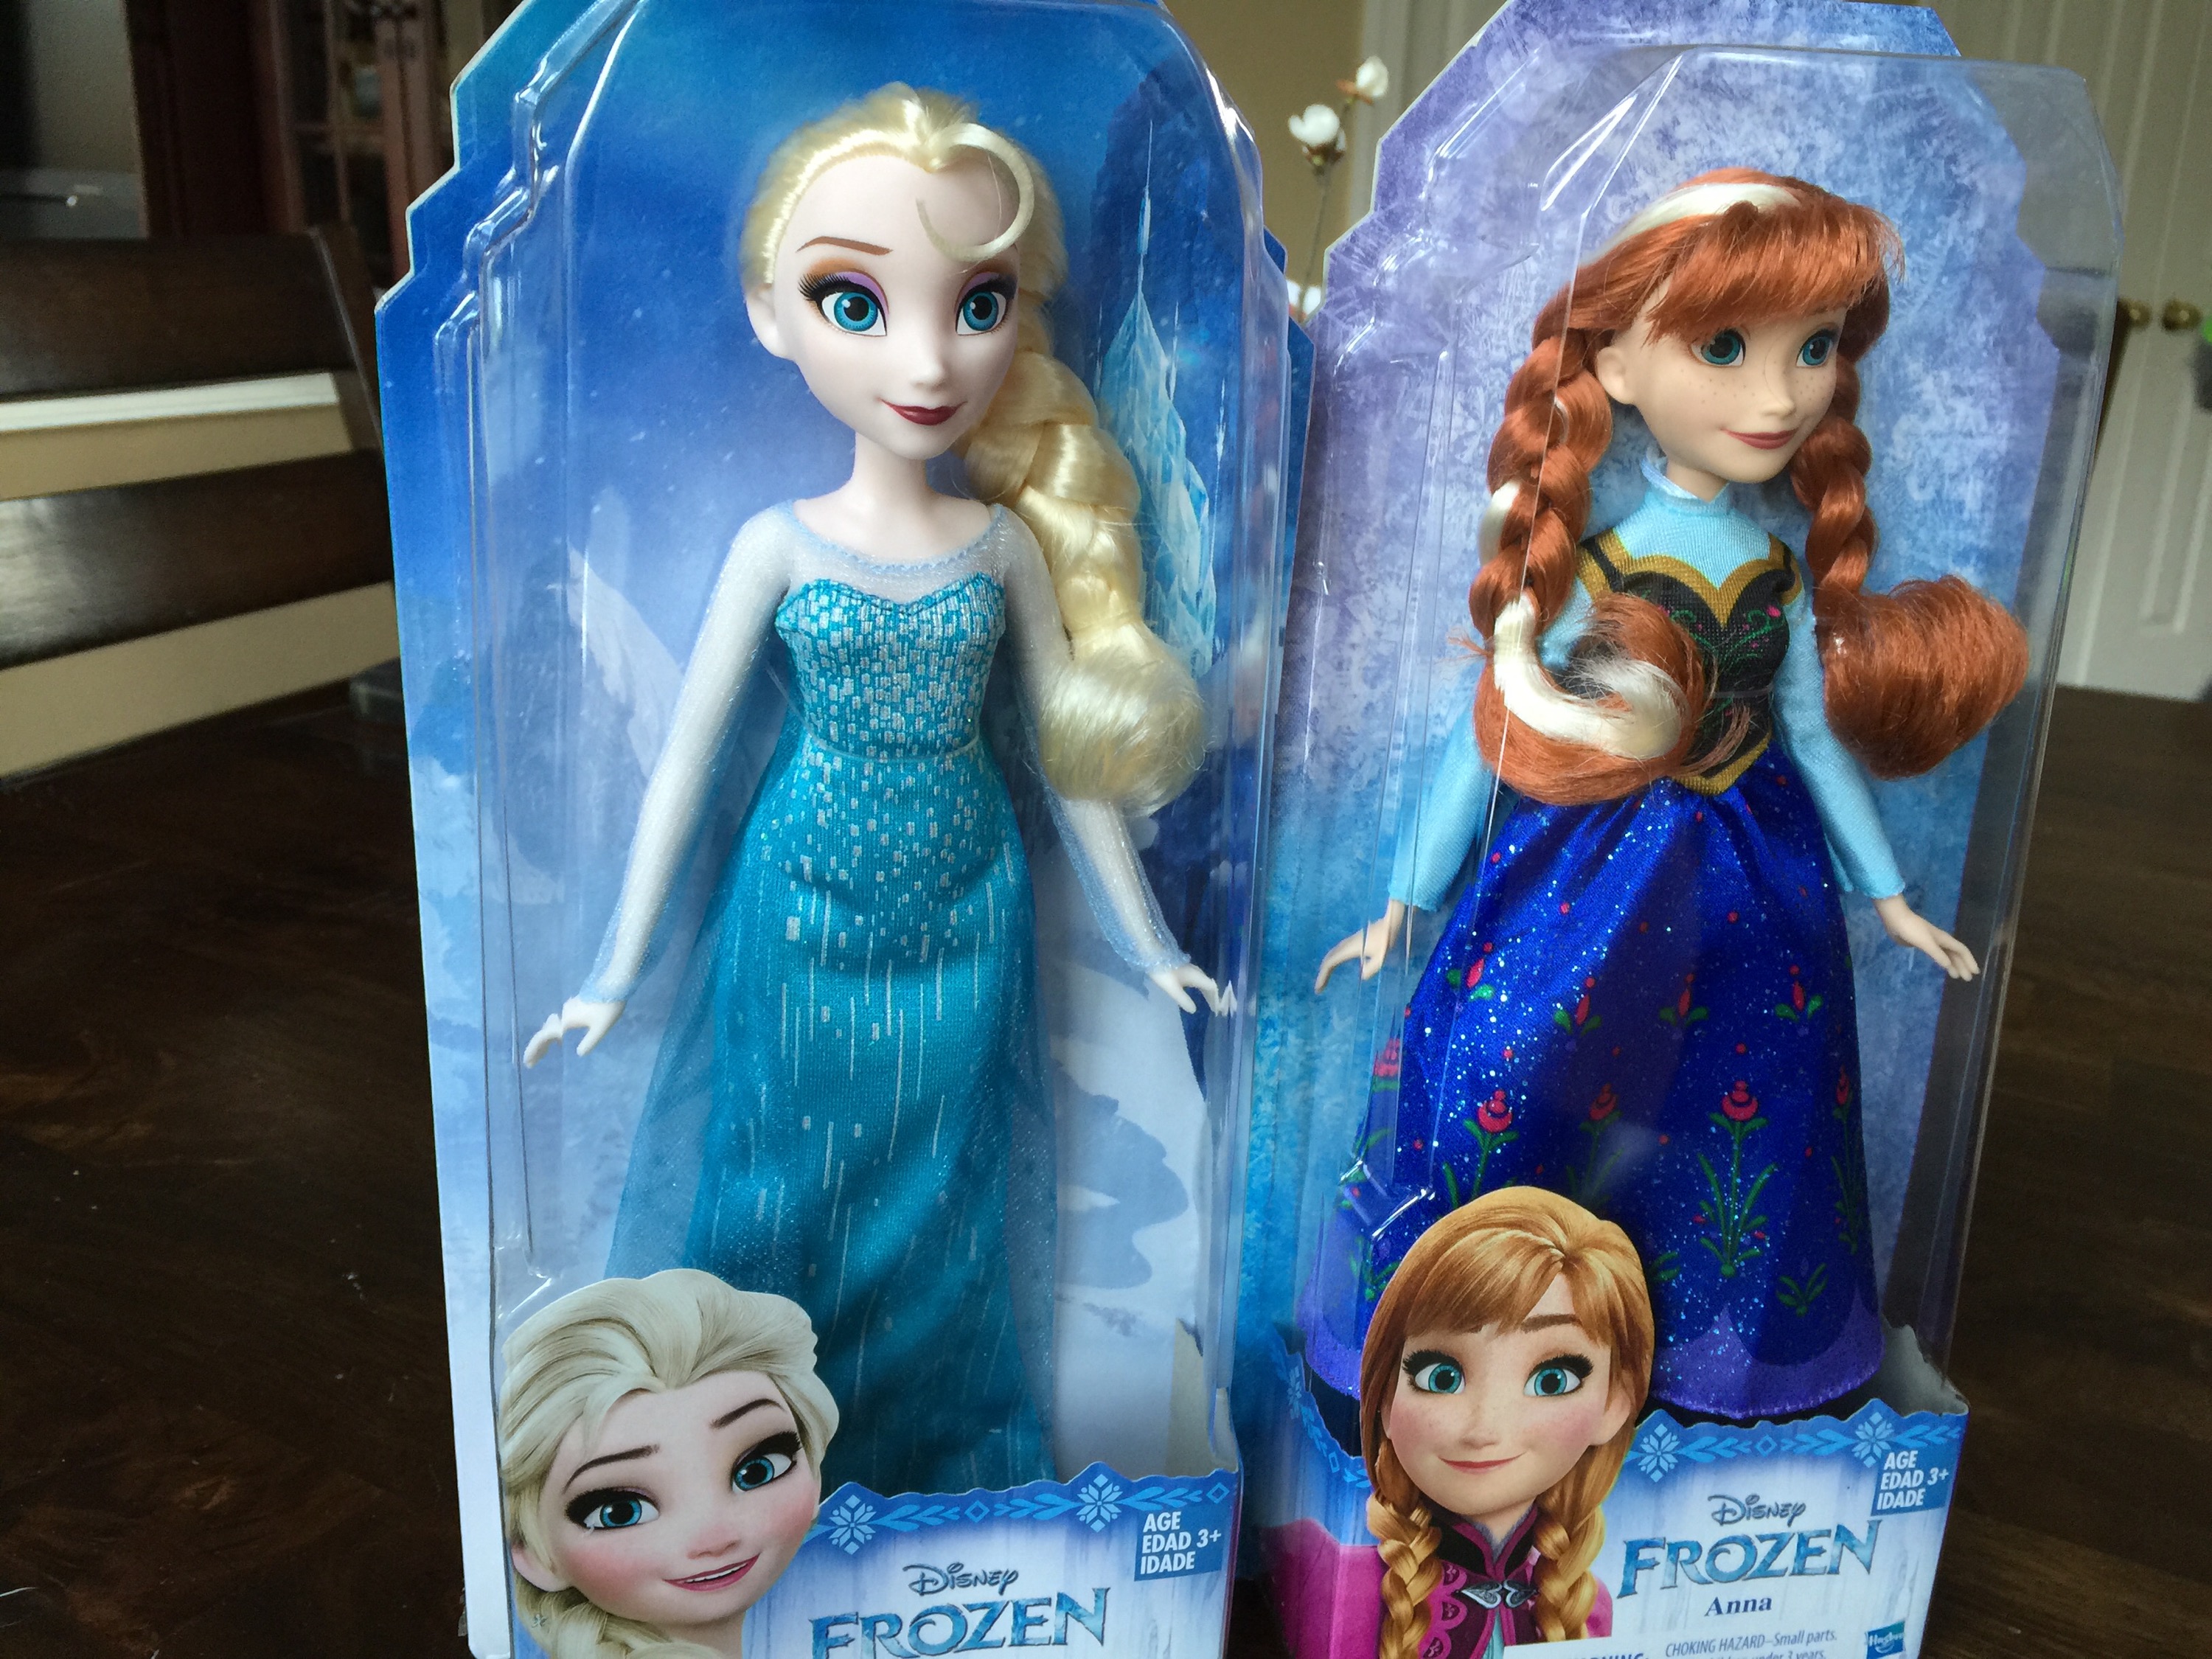 Hasbro Disney Frozen 2 Elsa Fashion Doll with Long Blonde Hair and Blue Outfit - wide 7